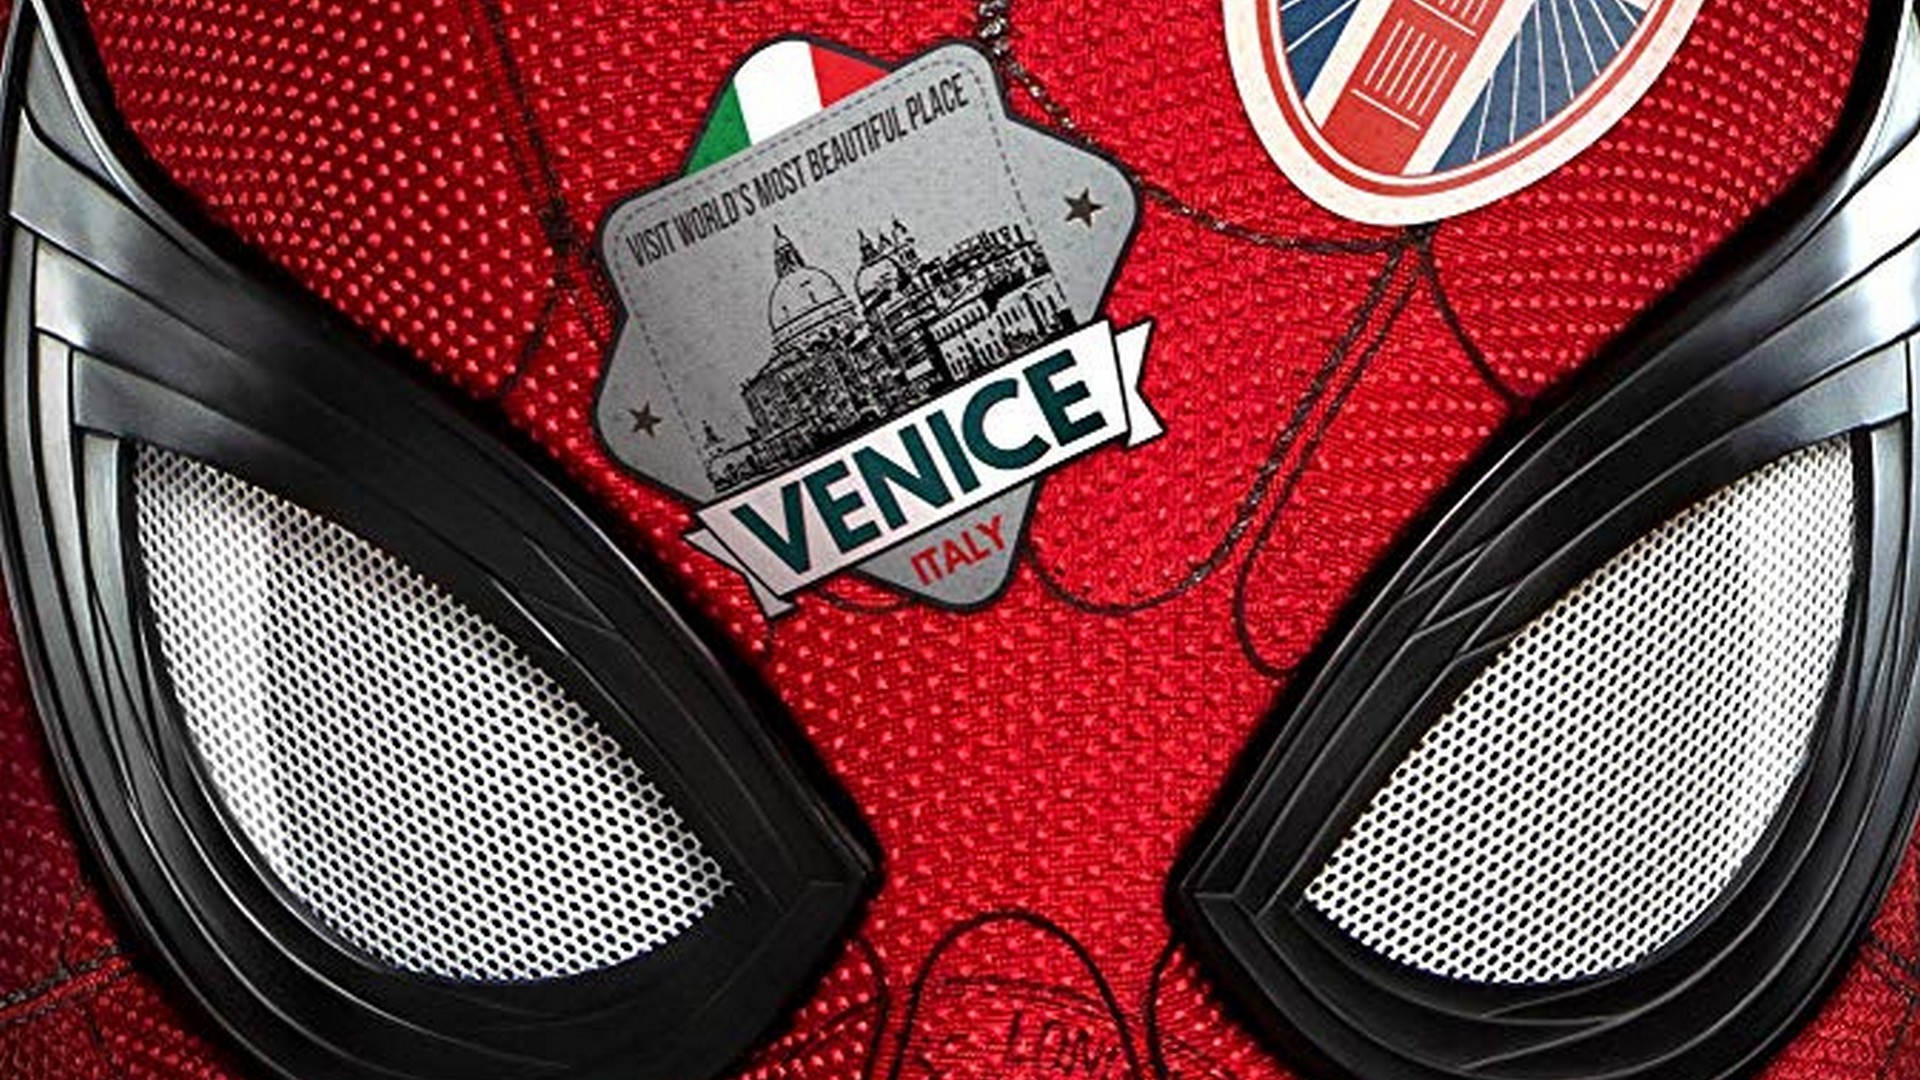 Spider-Man 2019 Far From Home Wallpaper with high-resolution 1920x1080 pixel. You can use this wallpaper for your Windows and Mac OS computers as well as your Android and iPhone smartphones